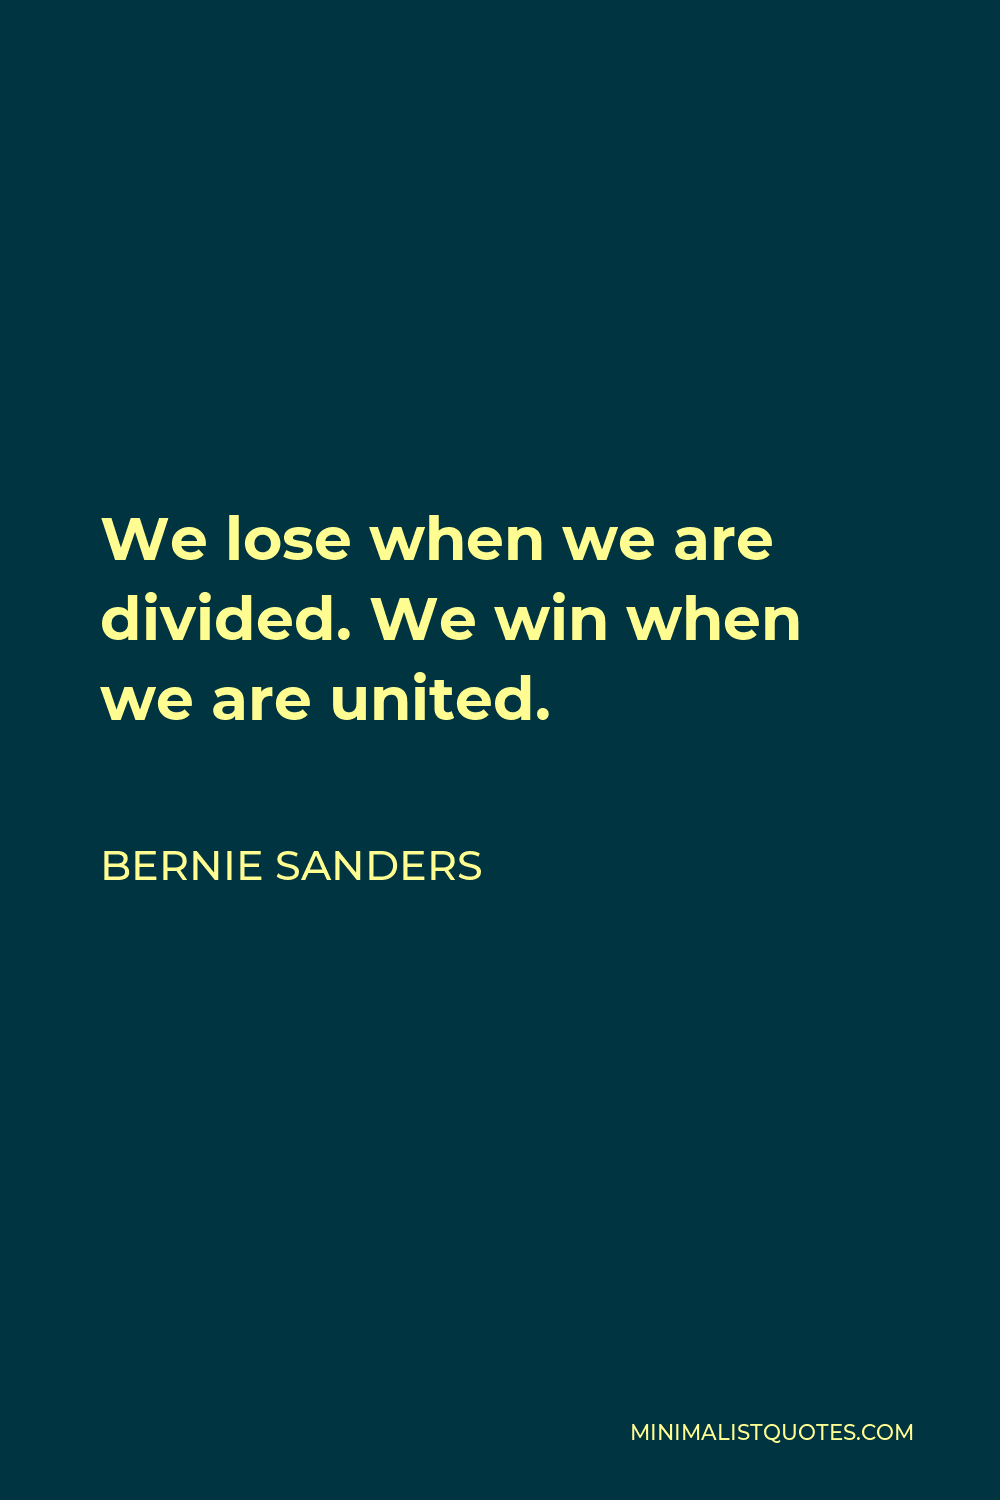 Bernie Sanders Quote - We lose when we are divided. We win when we are united.